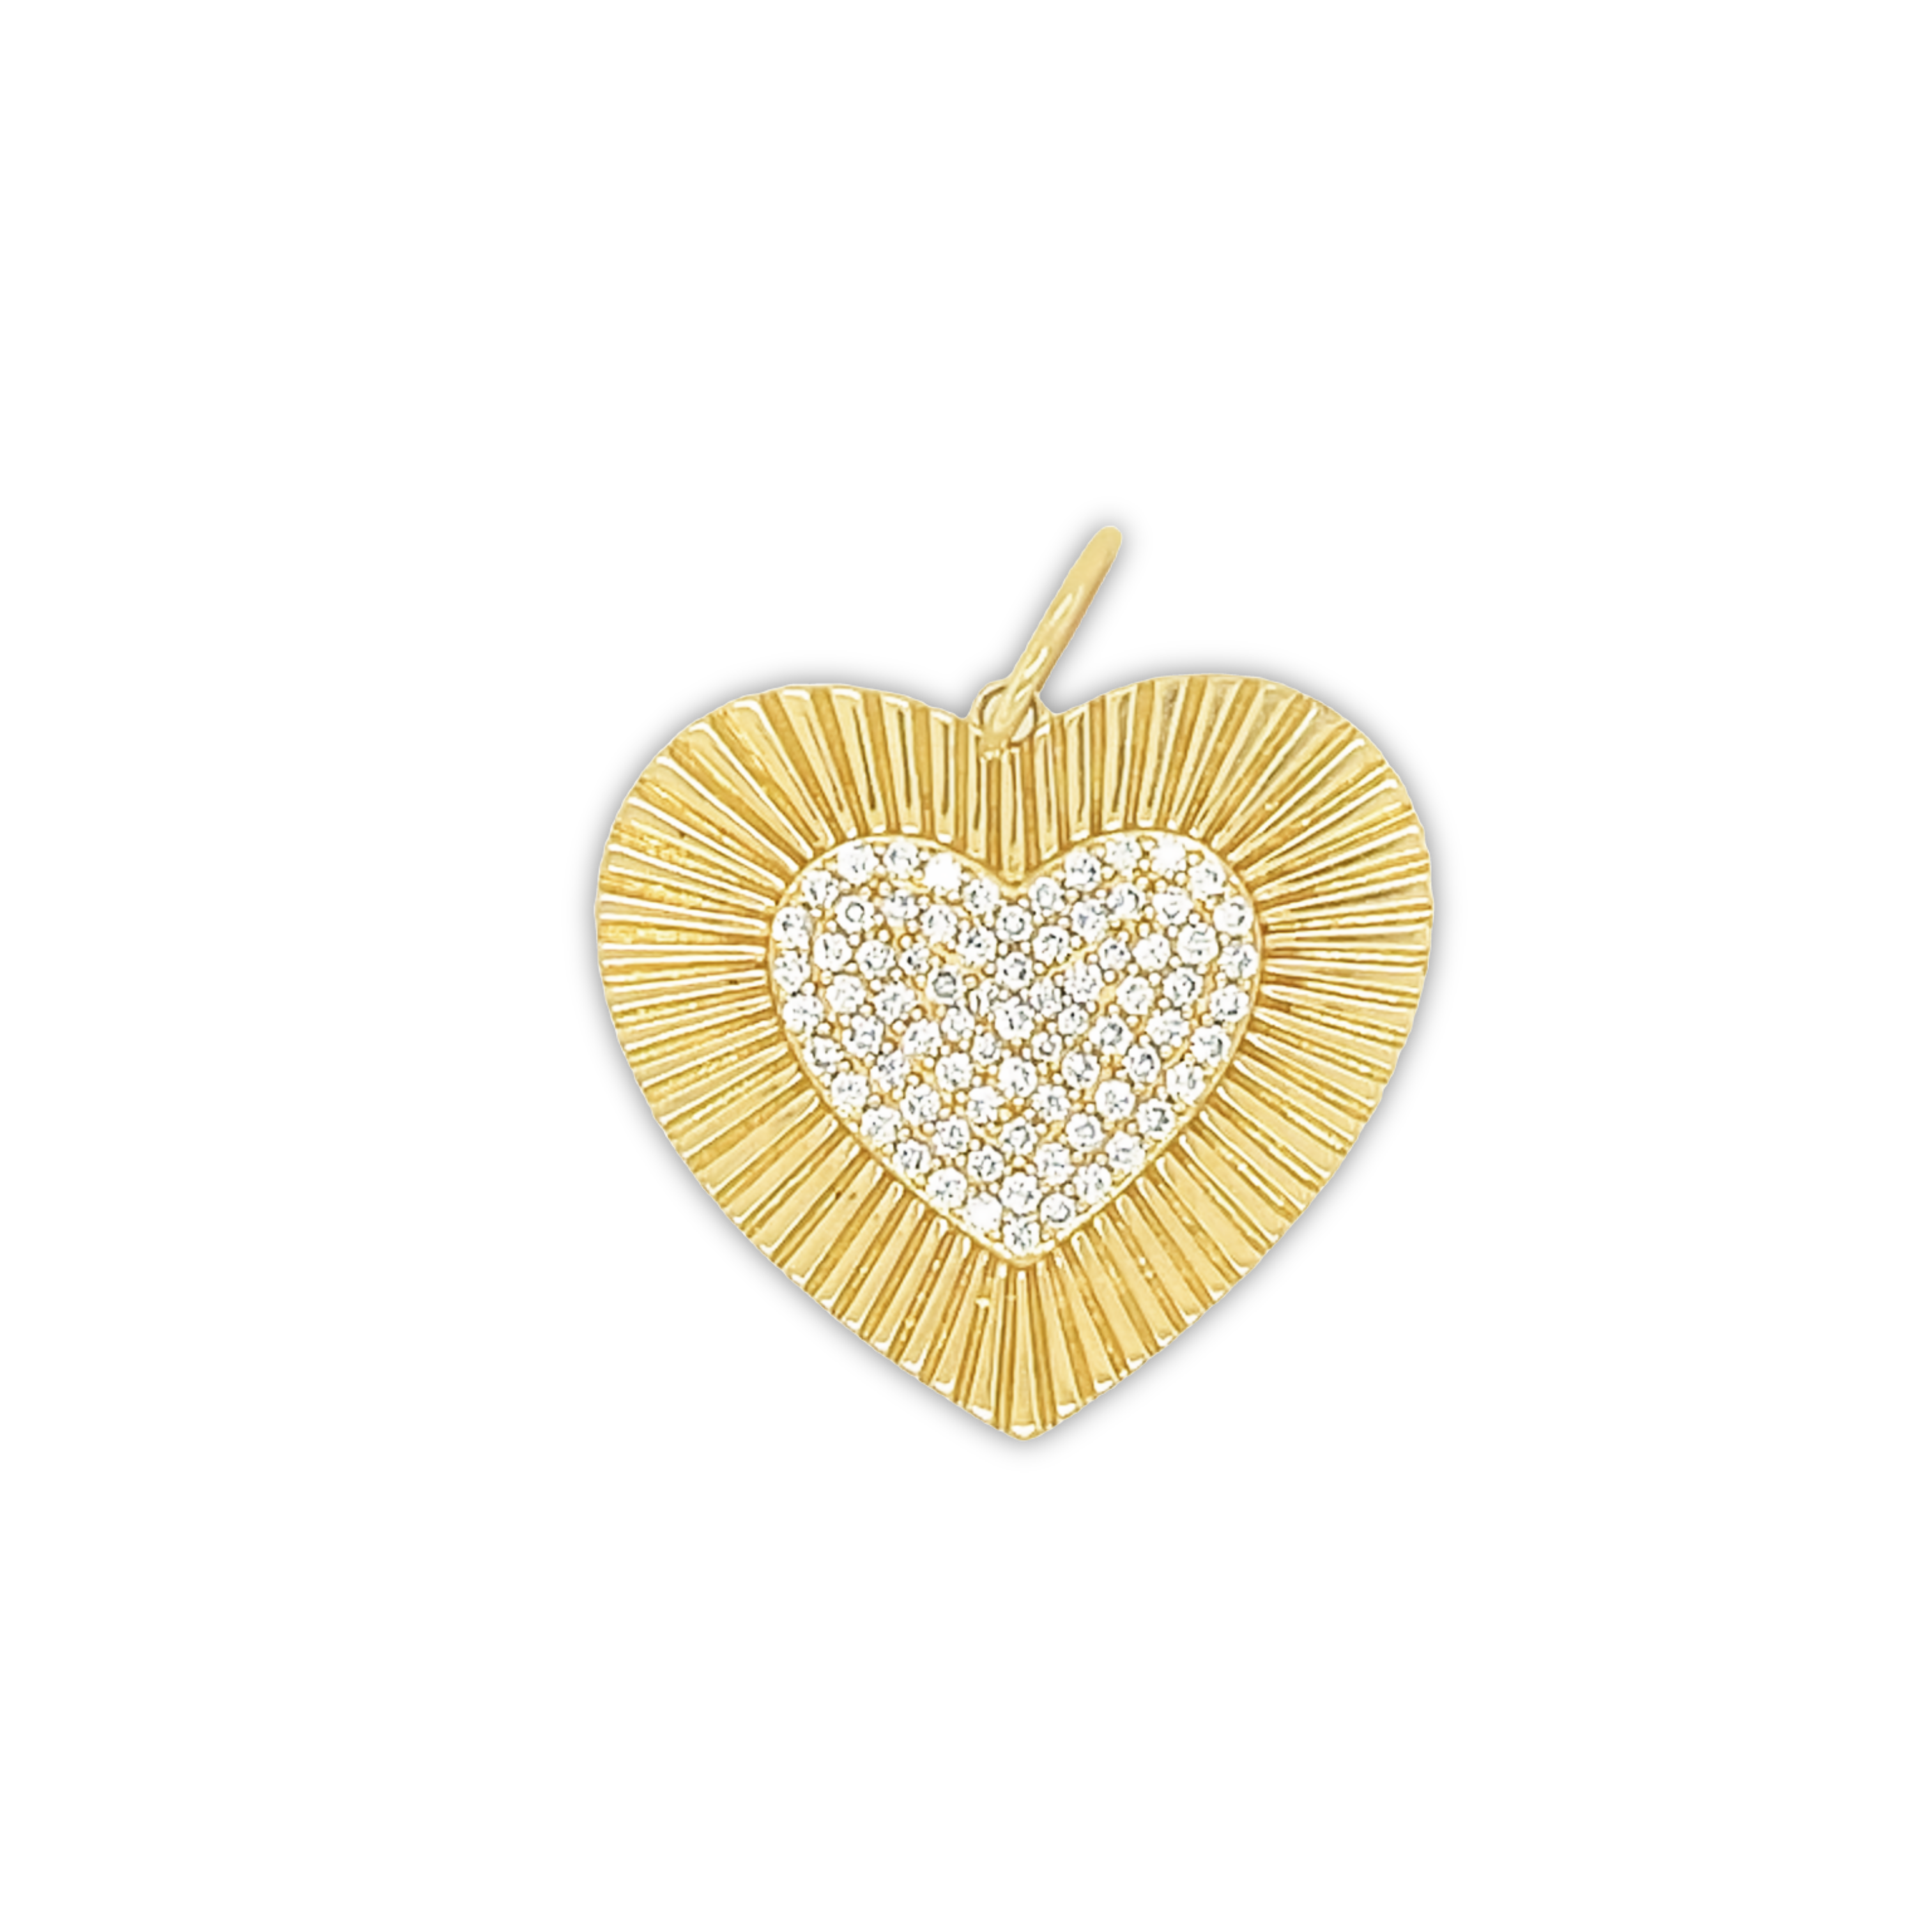 Featured image for “Corrugated Gold and Pave Diamond Heart”